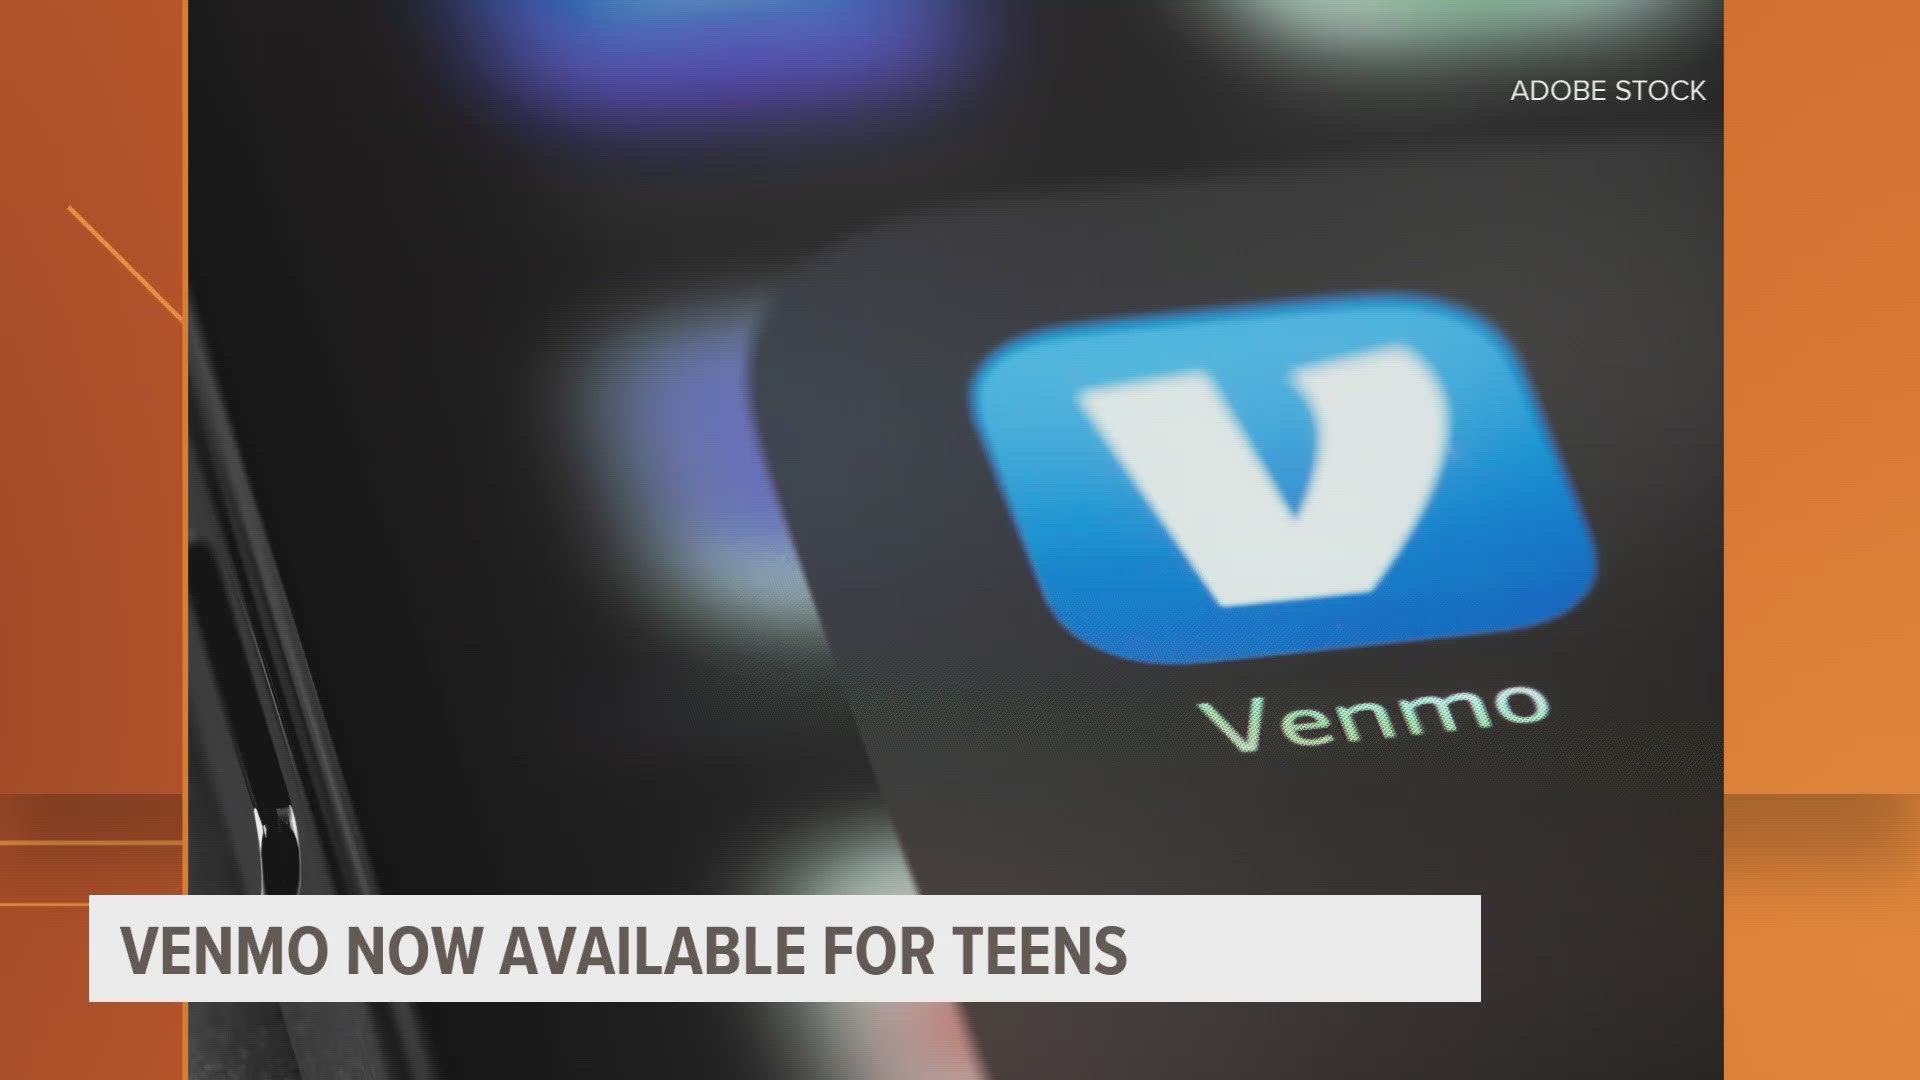 Venmo launched supervised teen accounts, which allow kids aged 13 to 17 years old to open an account with parental permission.